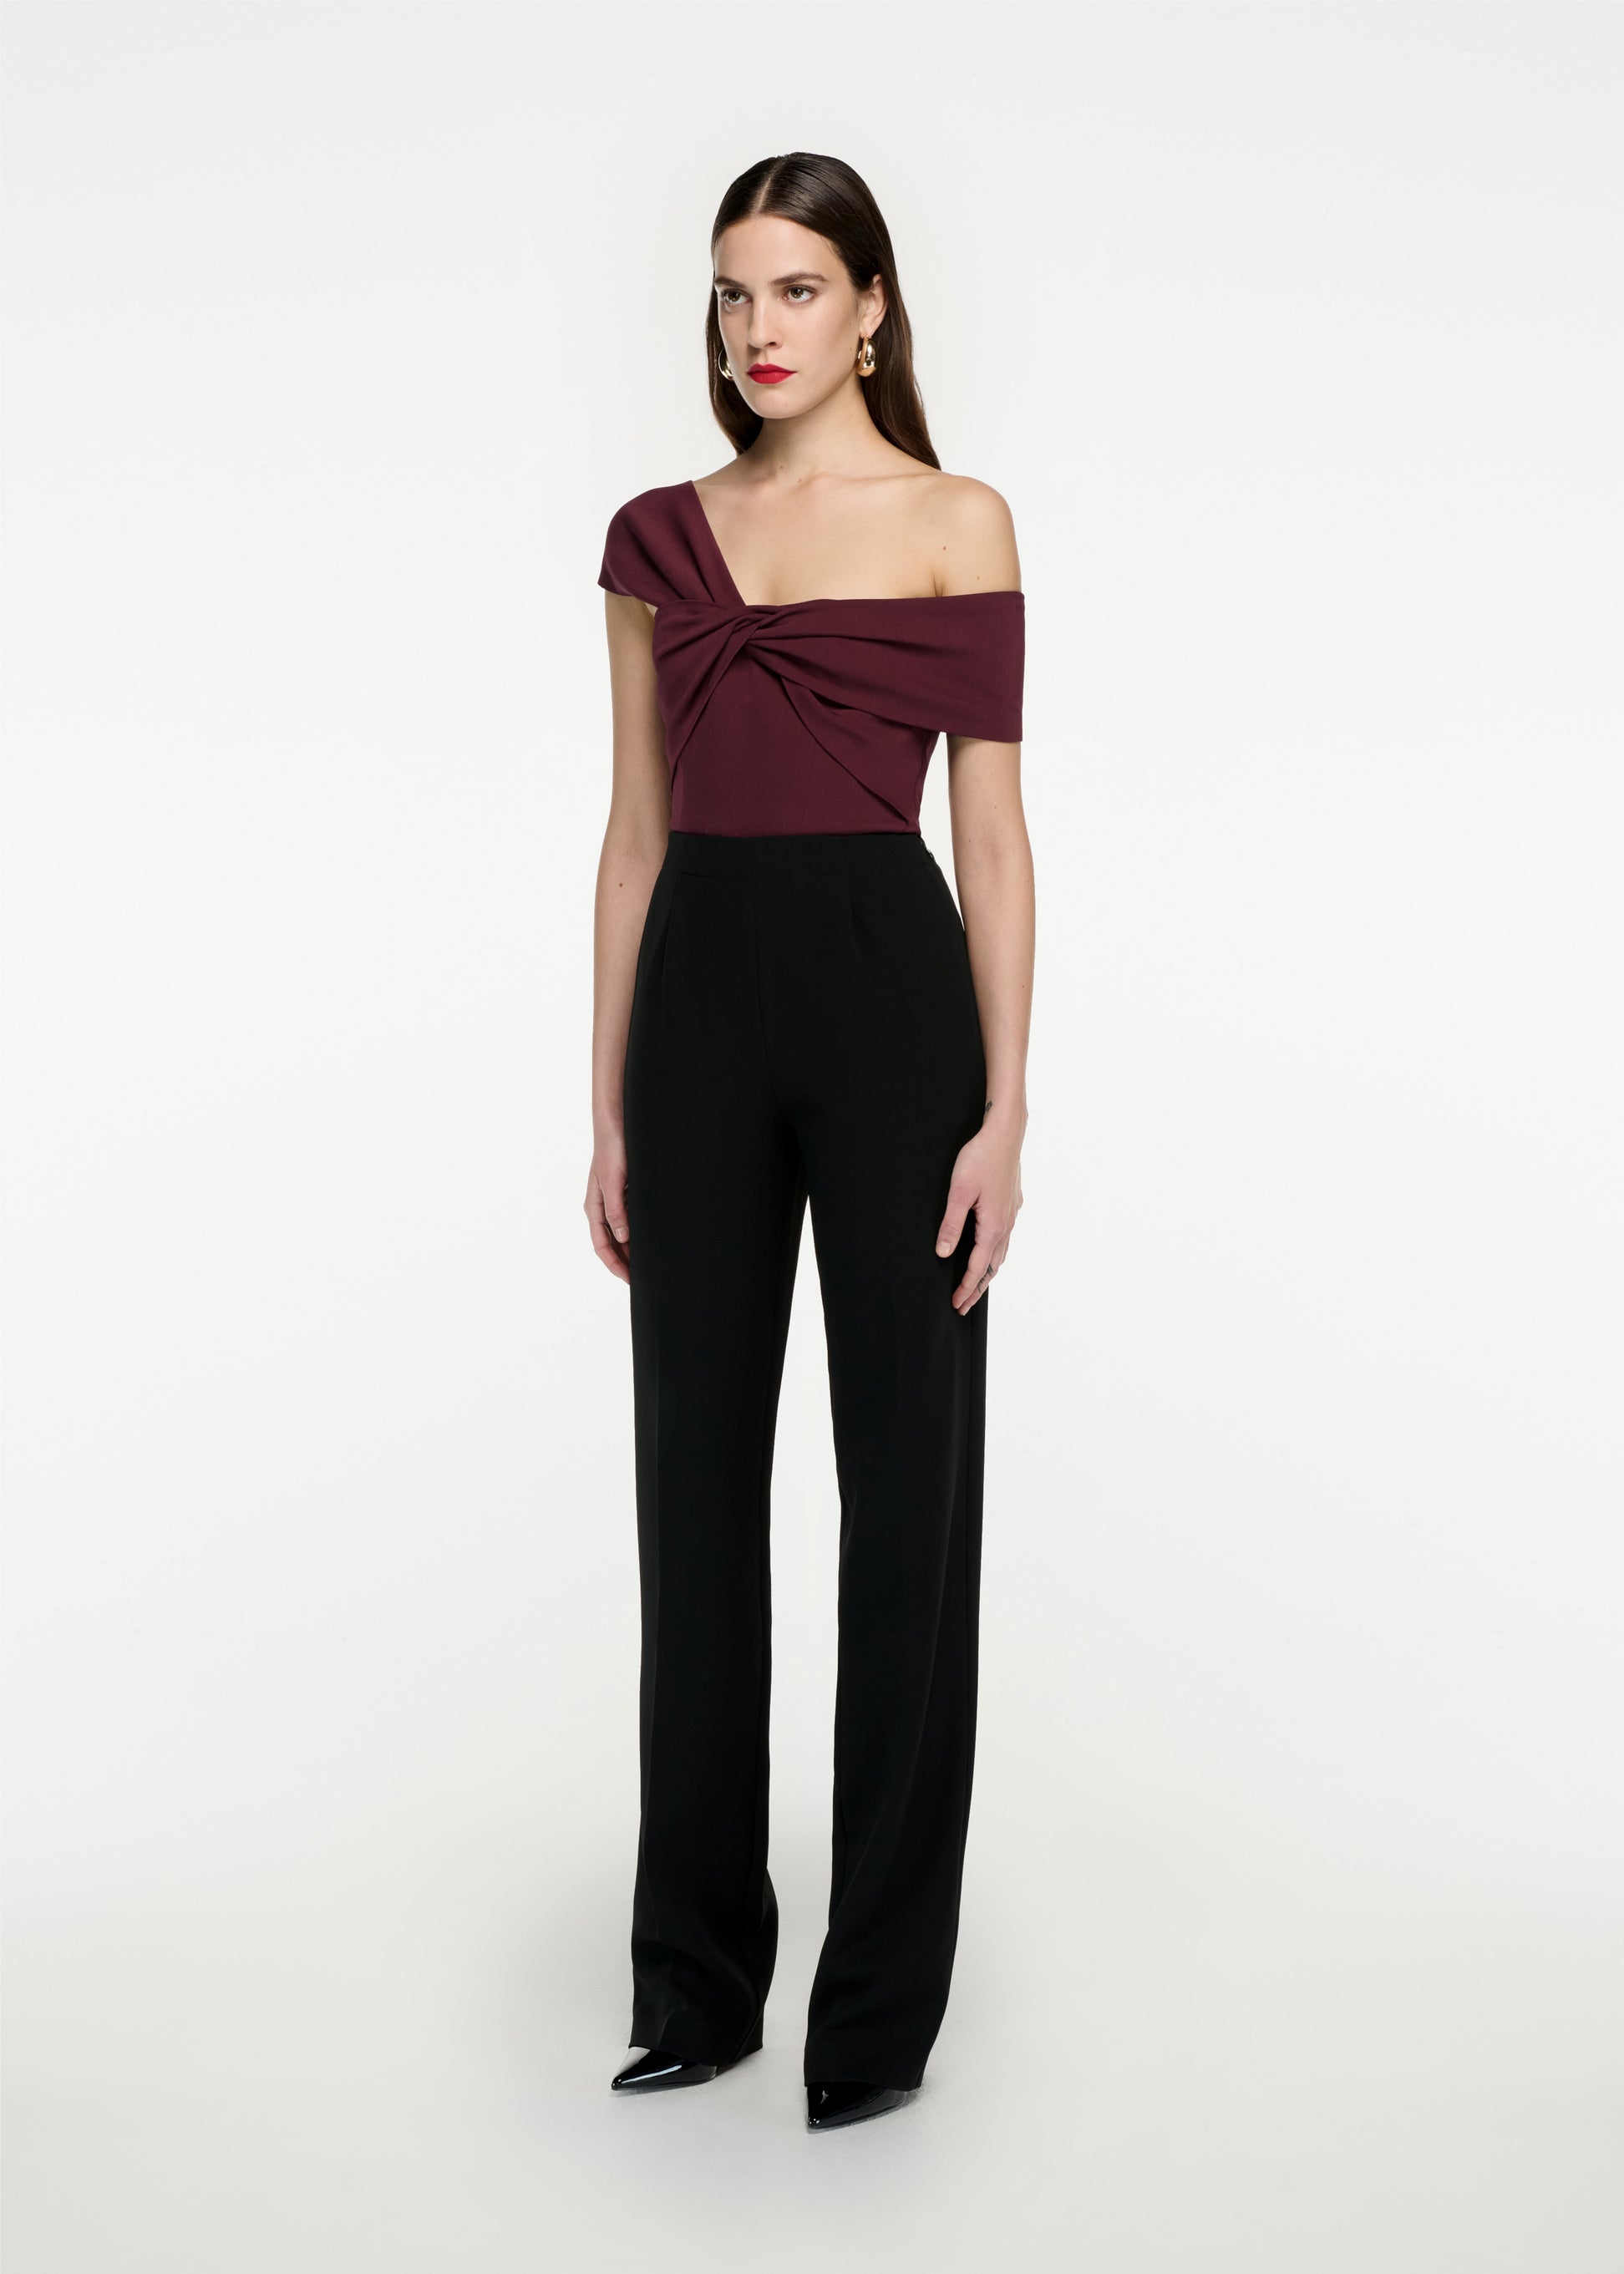 Woman wearing the Asymmetric Stretch Cady Top in Maroon